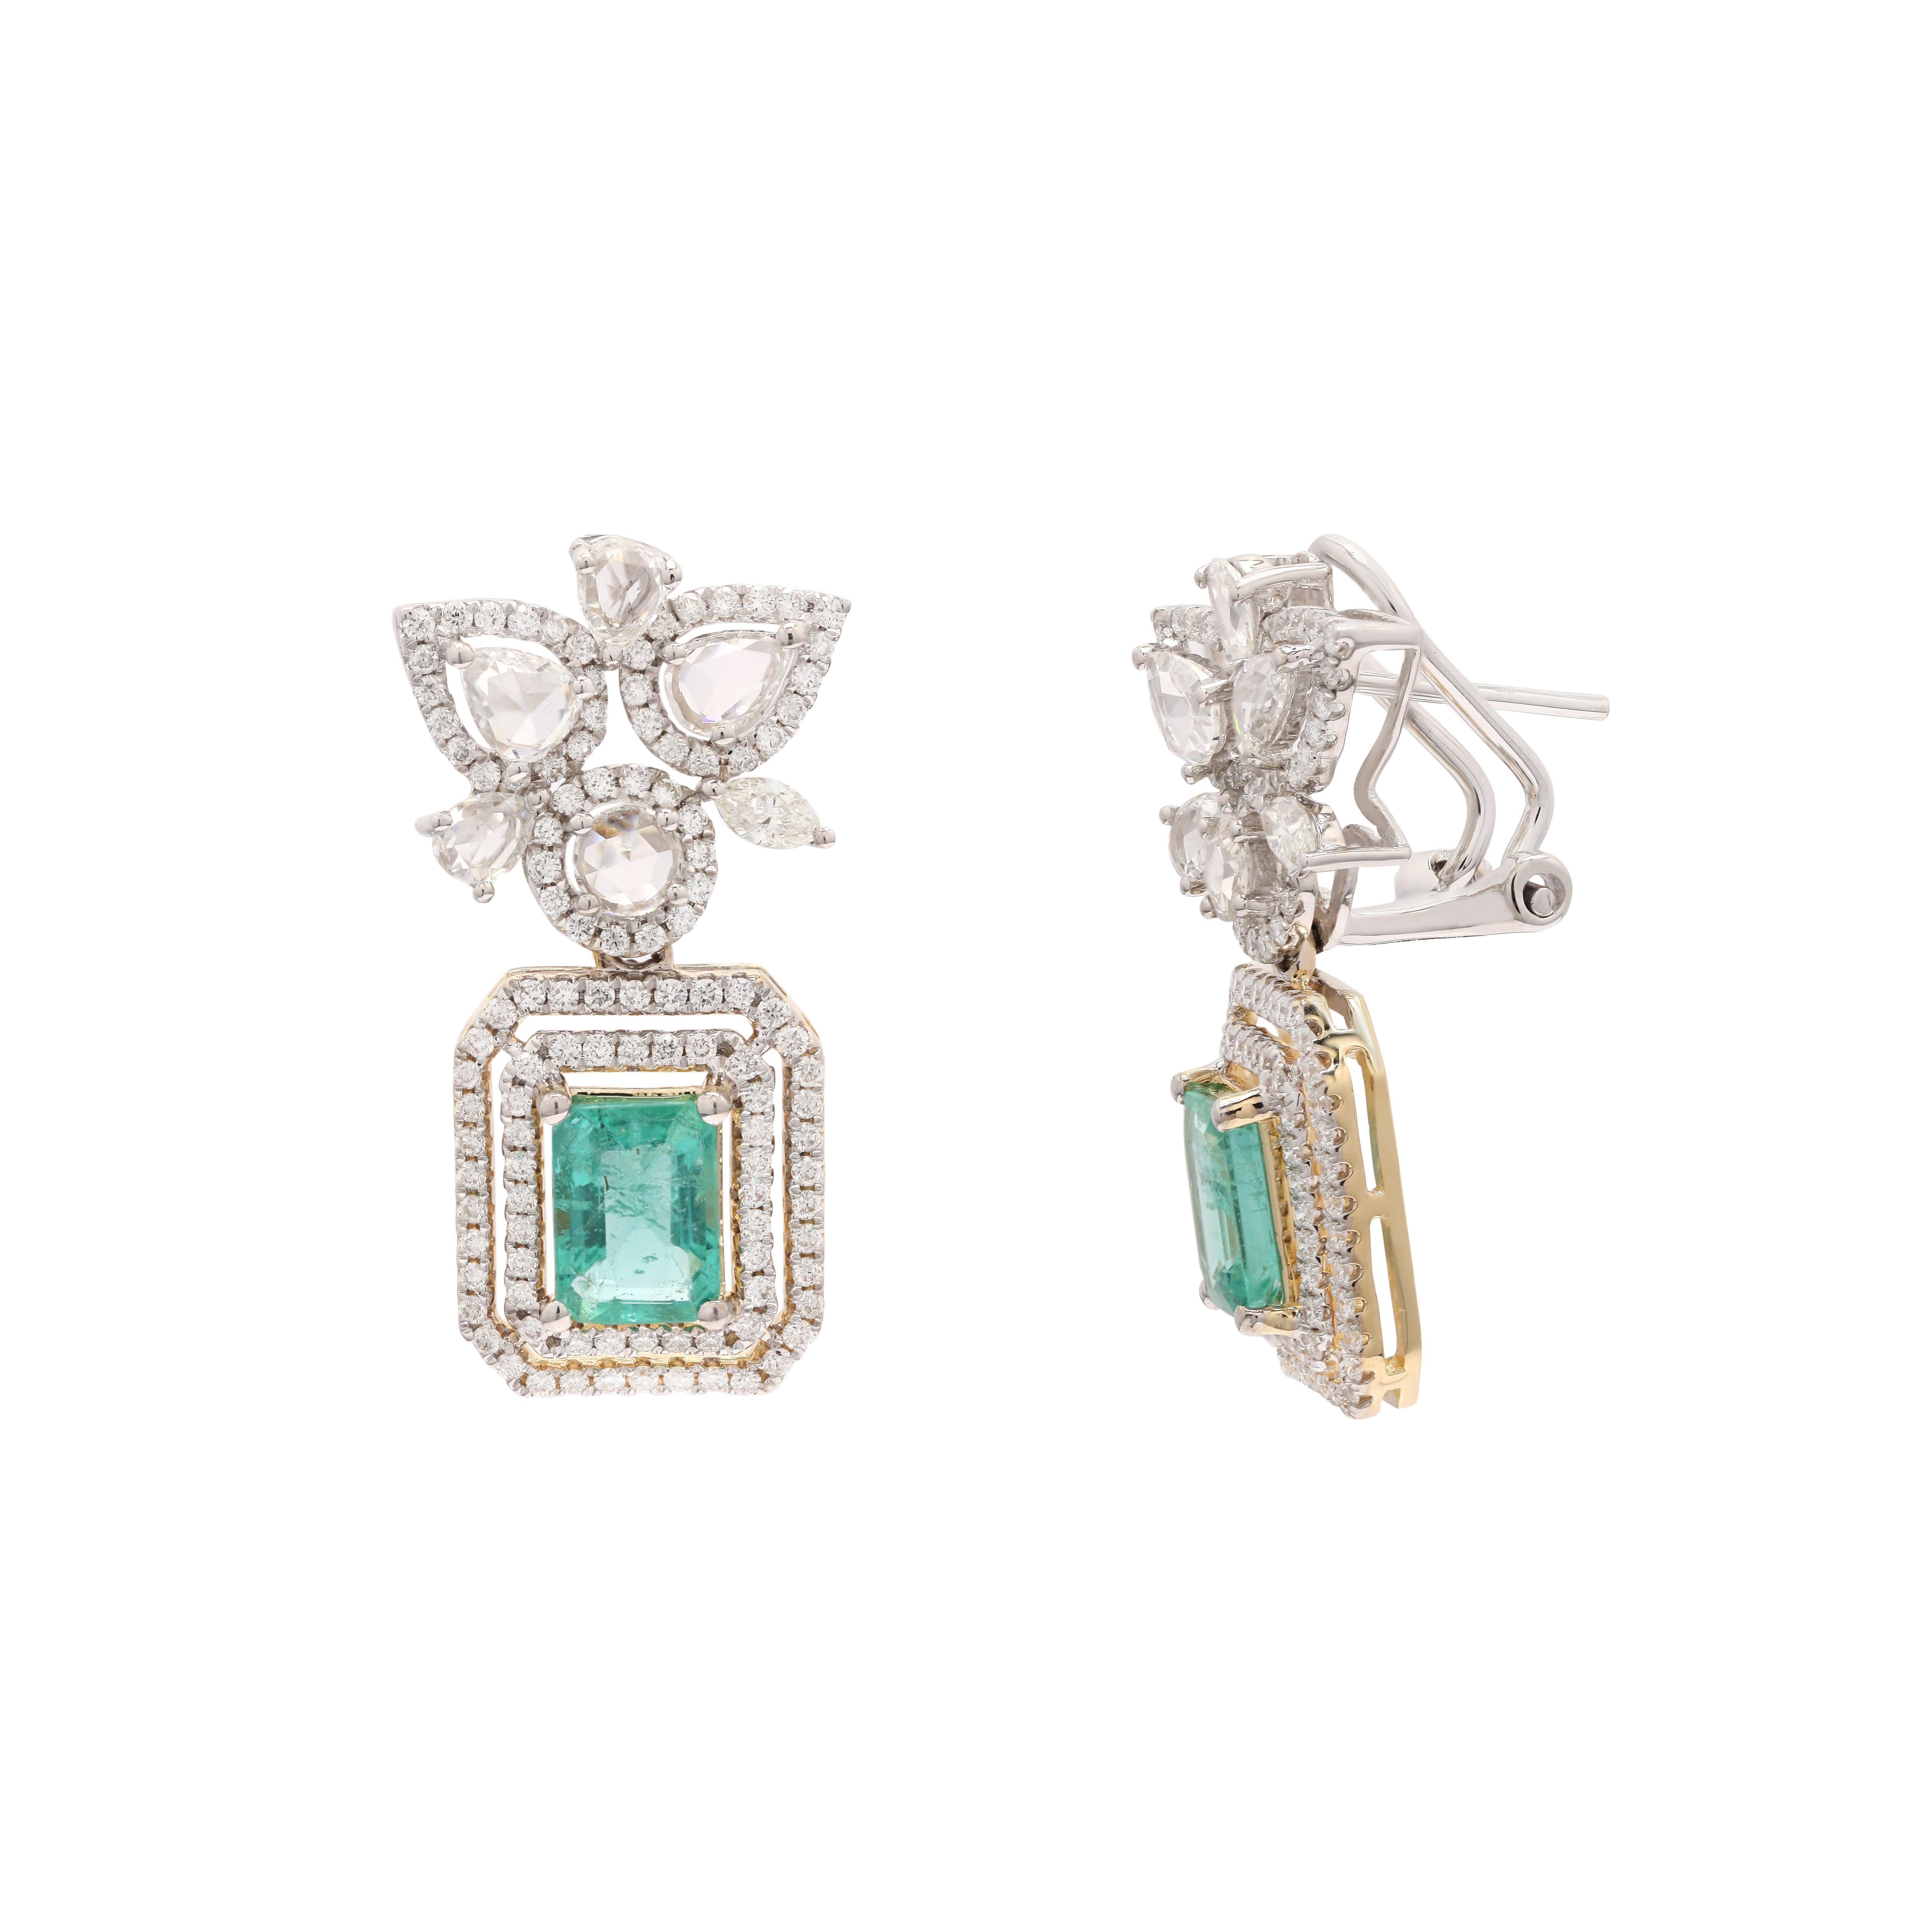 Earrings create a subtle beauty while showcasing the colors of the natural precious gemstones and illuminating diamonds making a statement.

Octagon cut Emerald earrings in 14K gold. Embrace your look with these stunning pair of earrings suitable